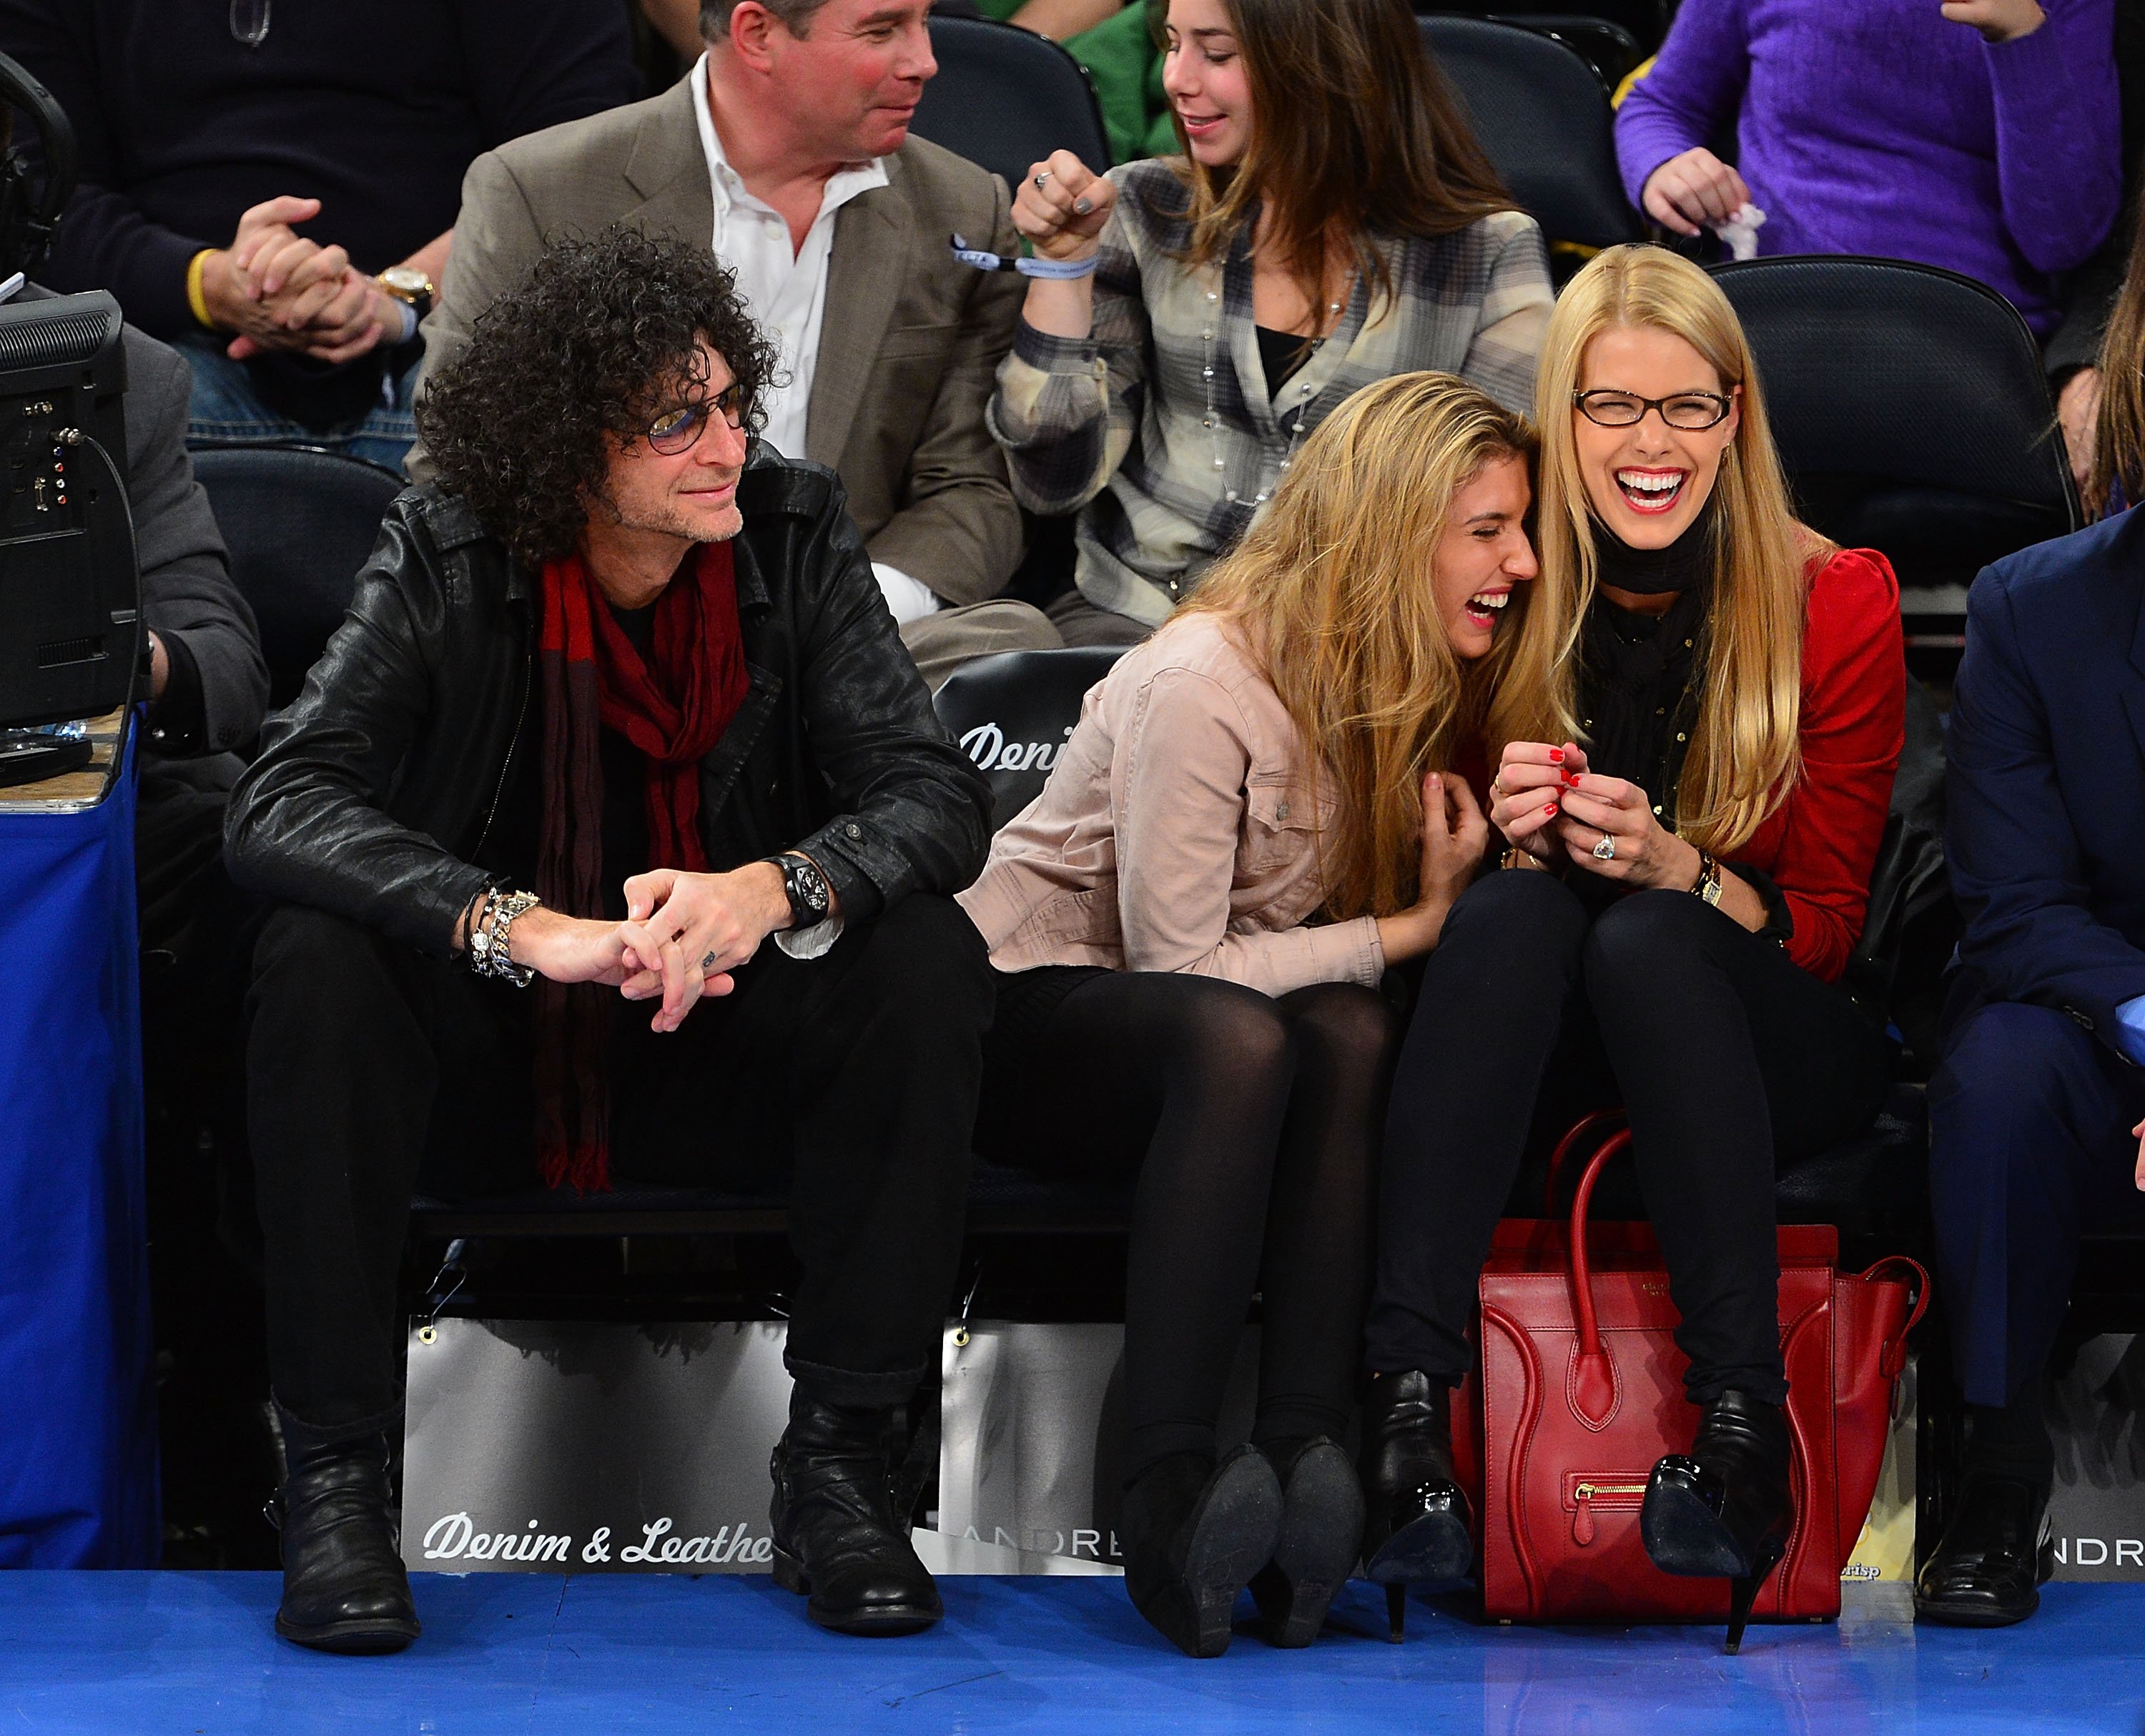 Howard Stern, Ashley Stern and Beth Ostrosky attend the Orlando Magic vs New York Knicks game at Madison Square Garden, on January 30, 2013, in New York City.| Source: Getty Images